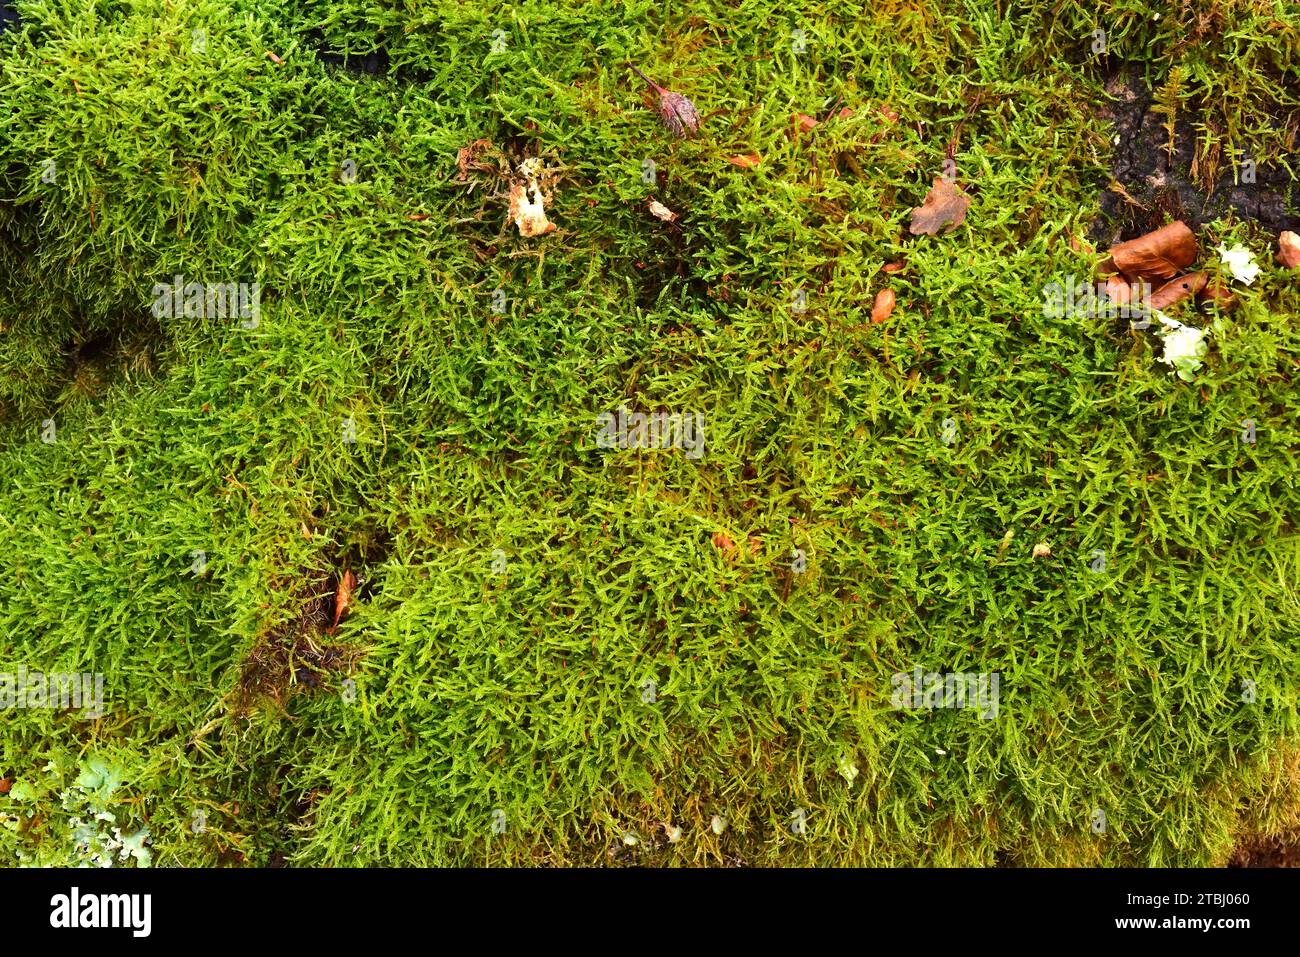 Cypress-leaved plaitmoss (Hypnum cupressiforme) is a cosmopolitan moss. This photo was taken in Monte Santiago Natural Monument, Burgos province, Cast Stock Photo